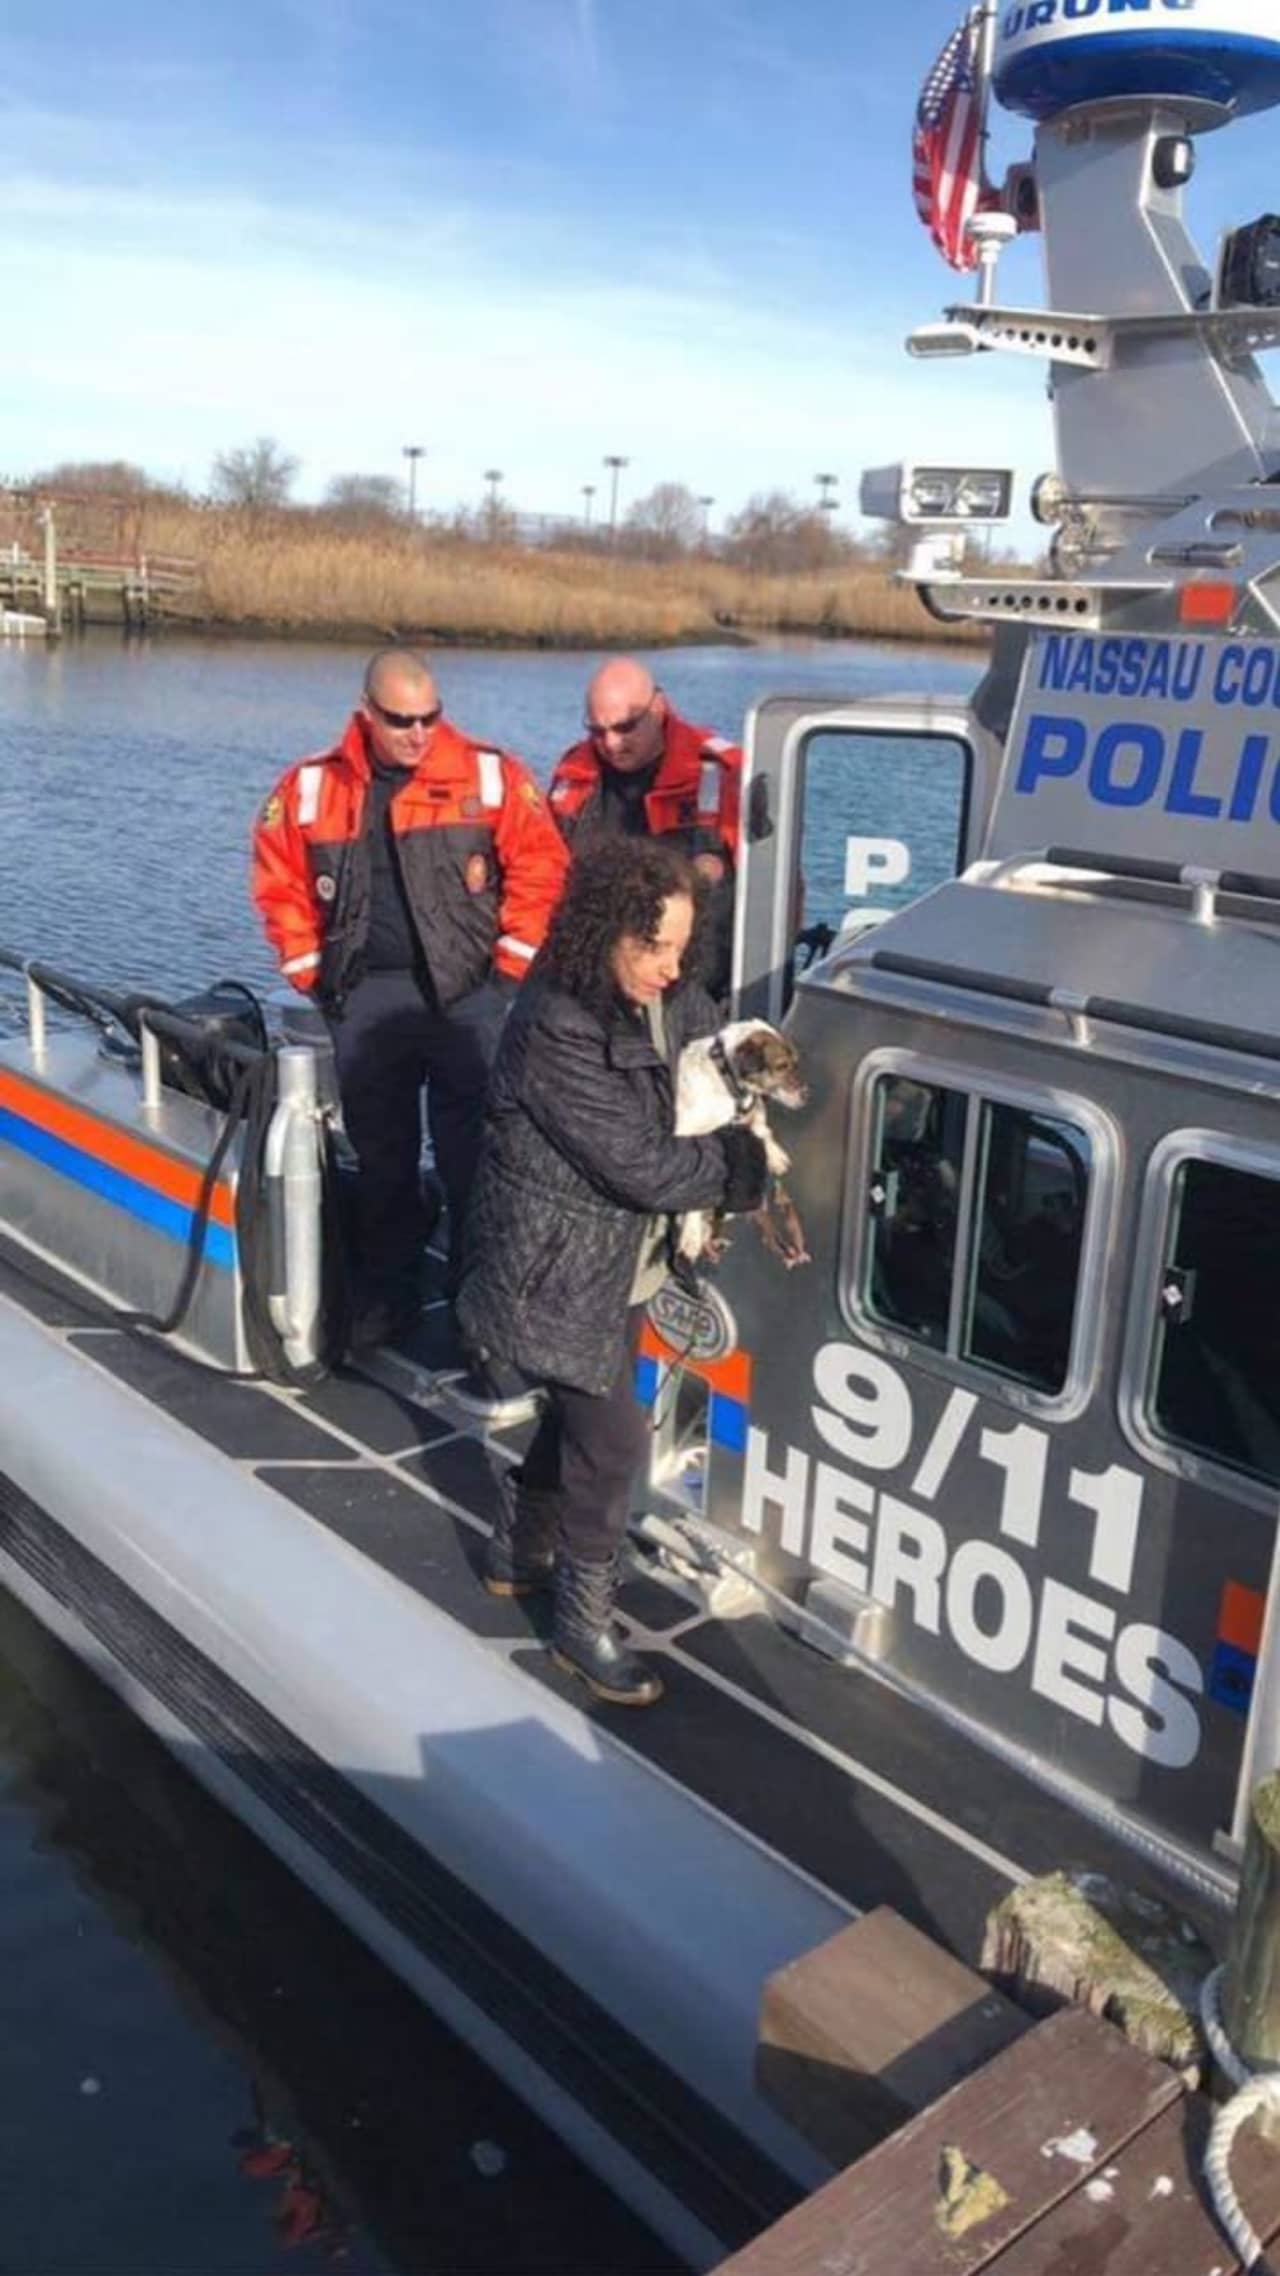 The officers return a dog who was drowning to its owner after rescuing the pup.